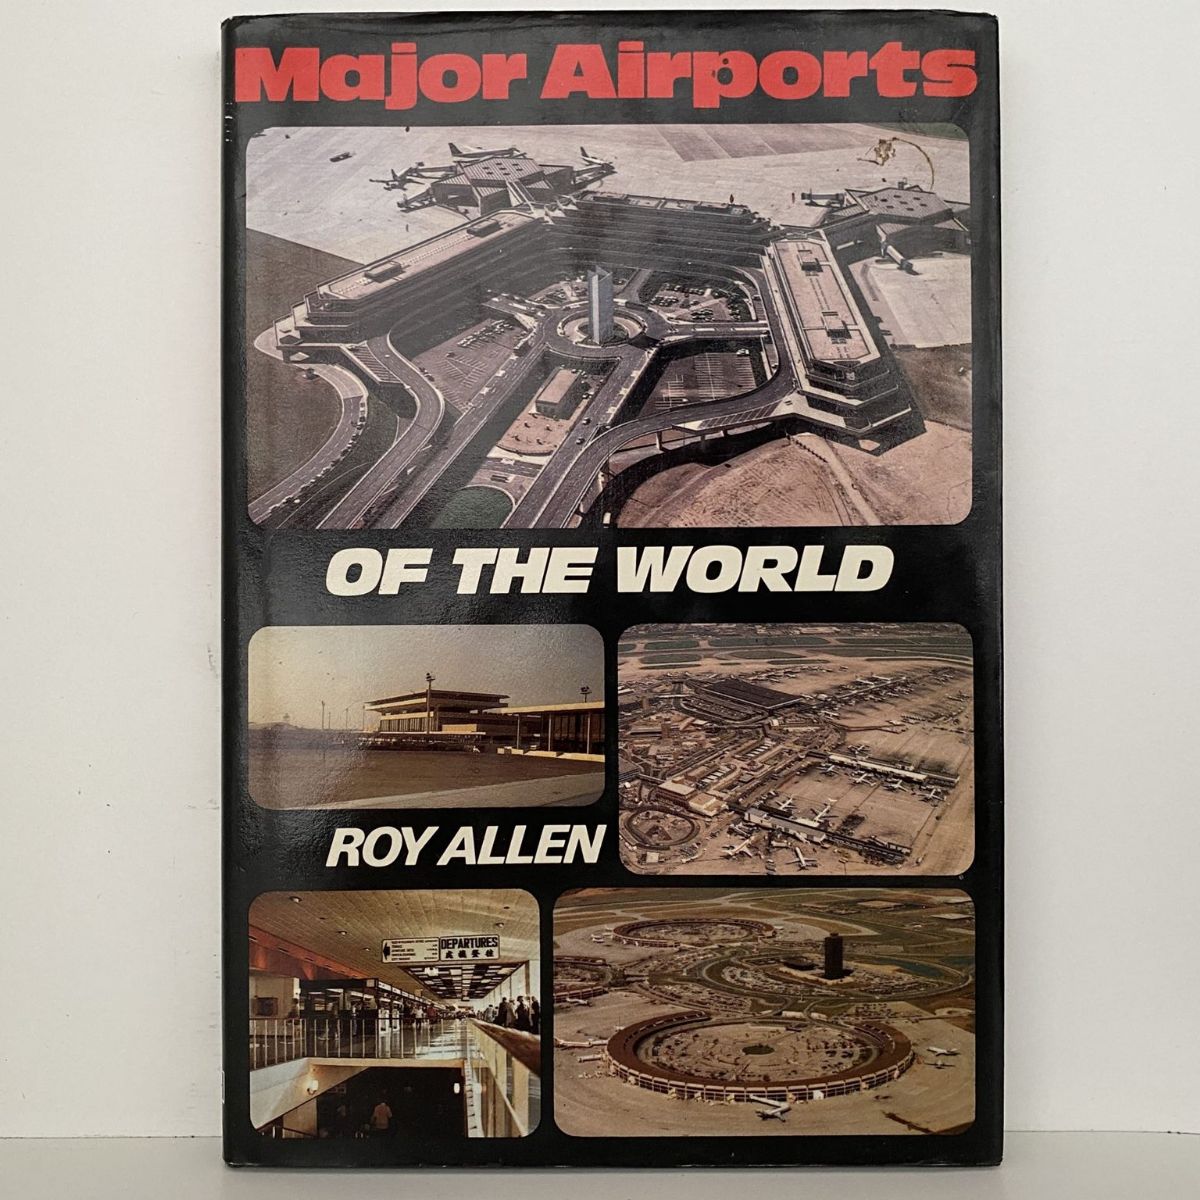 Major Airports of the World